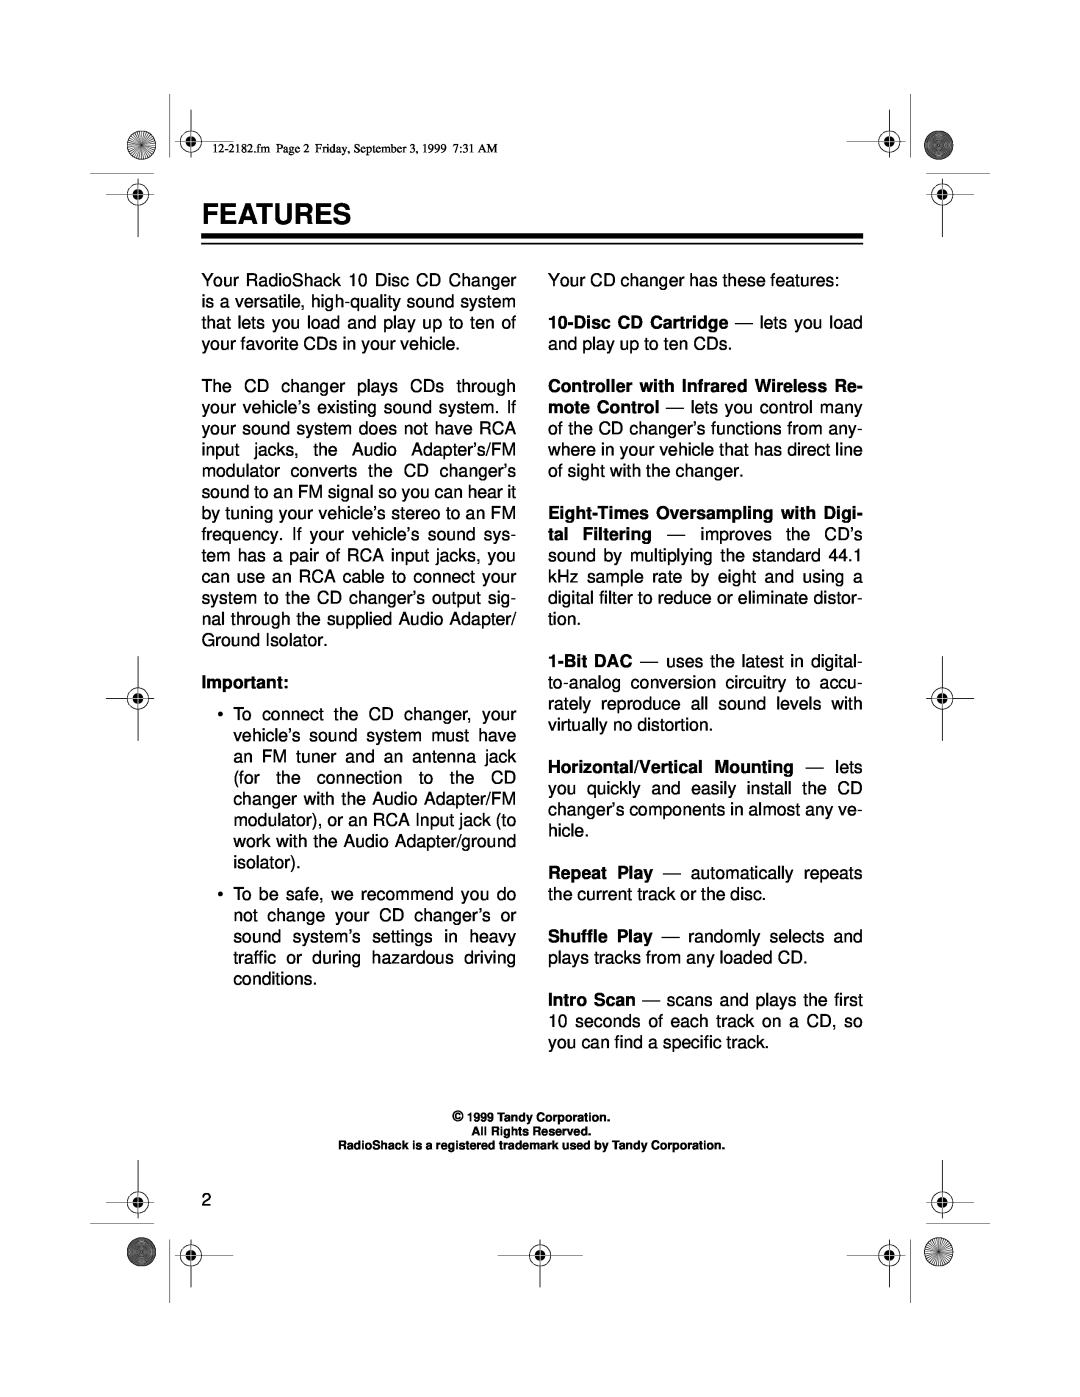 Radio Shack 10 Disc CD Changer owner manual Features 